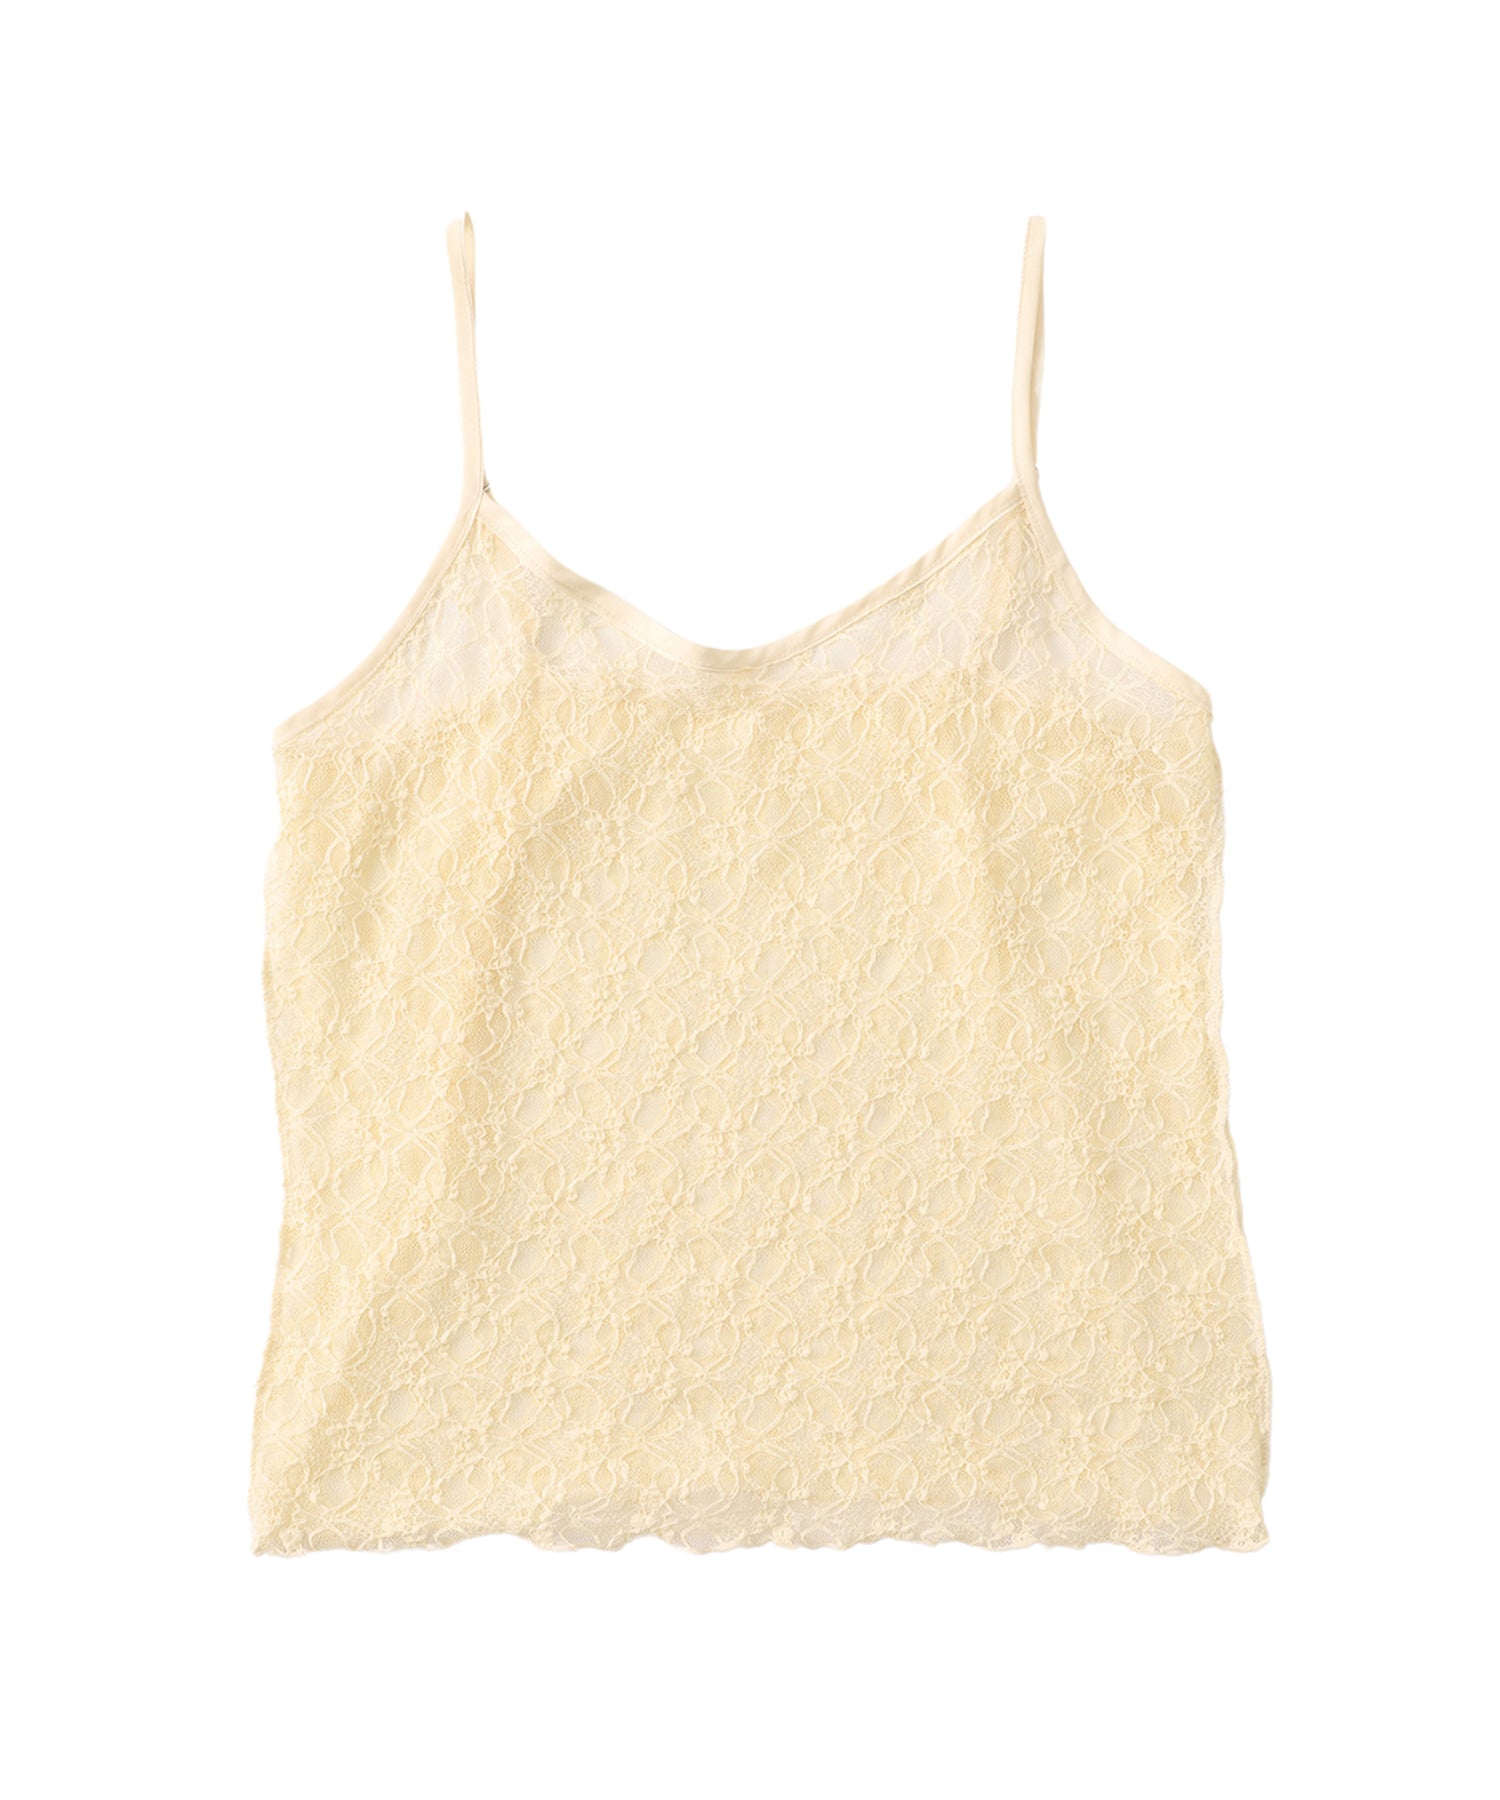 Flower lace camisole